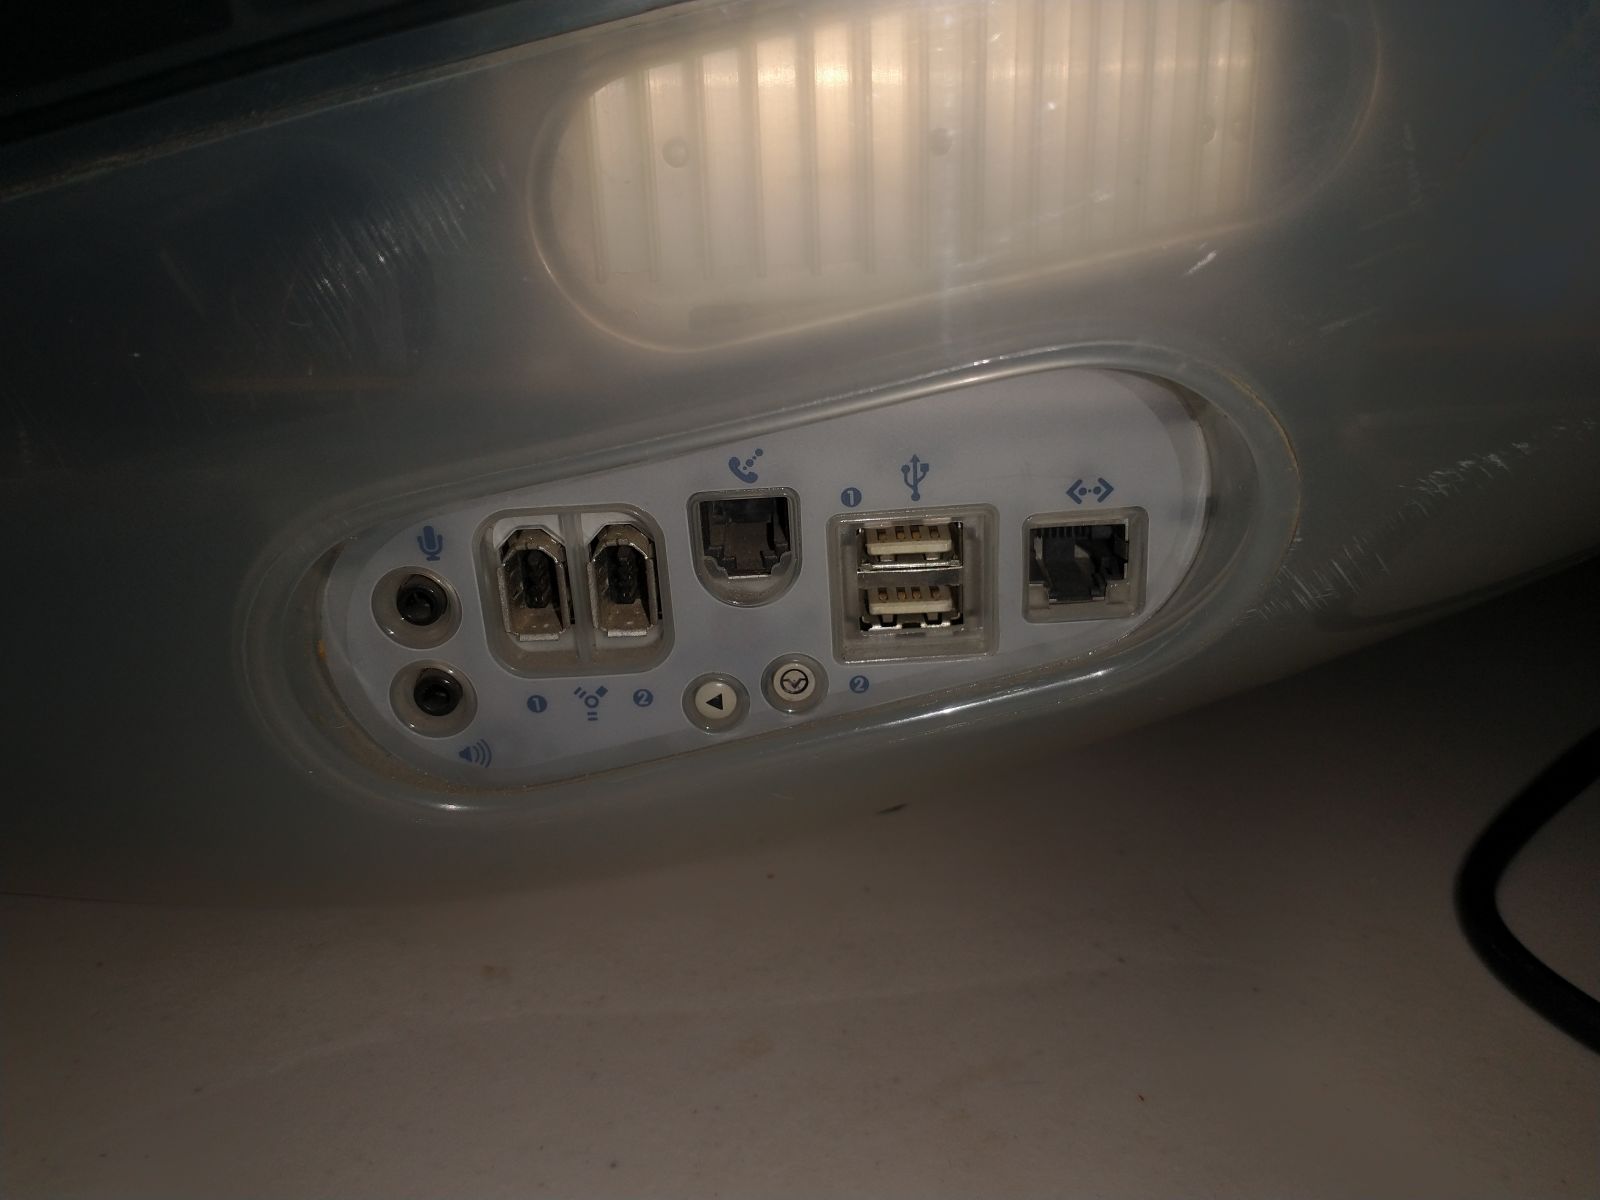 When was the last time you used a Firewire port?!